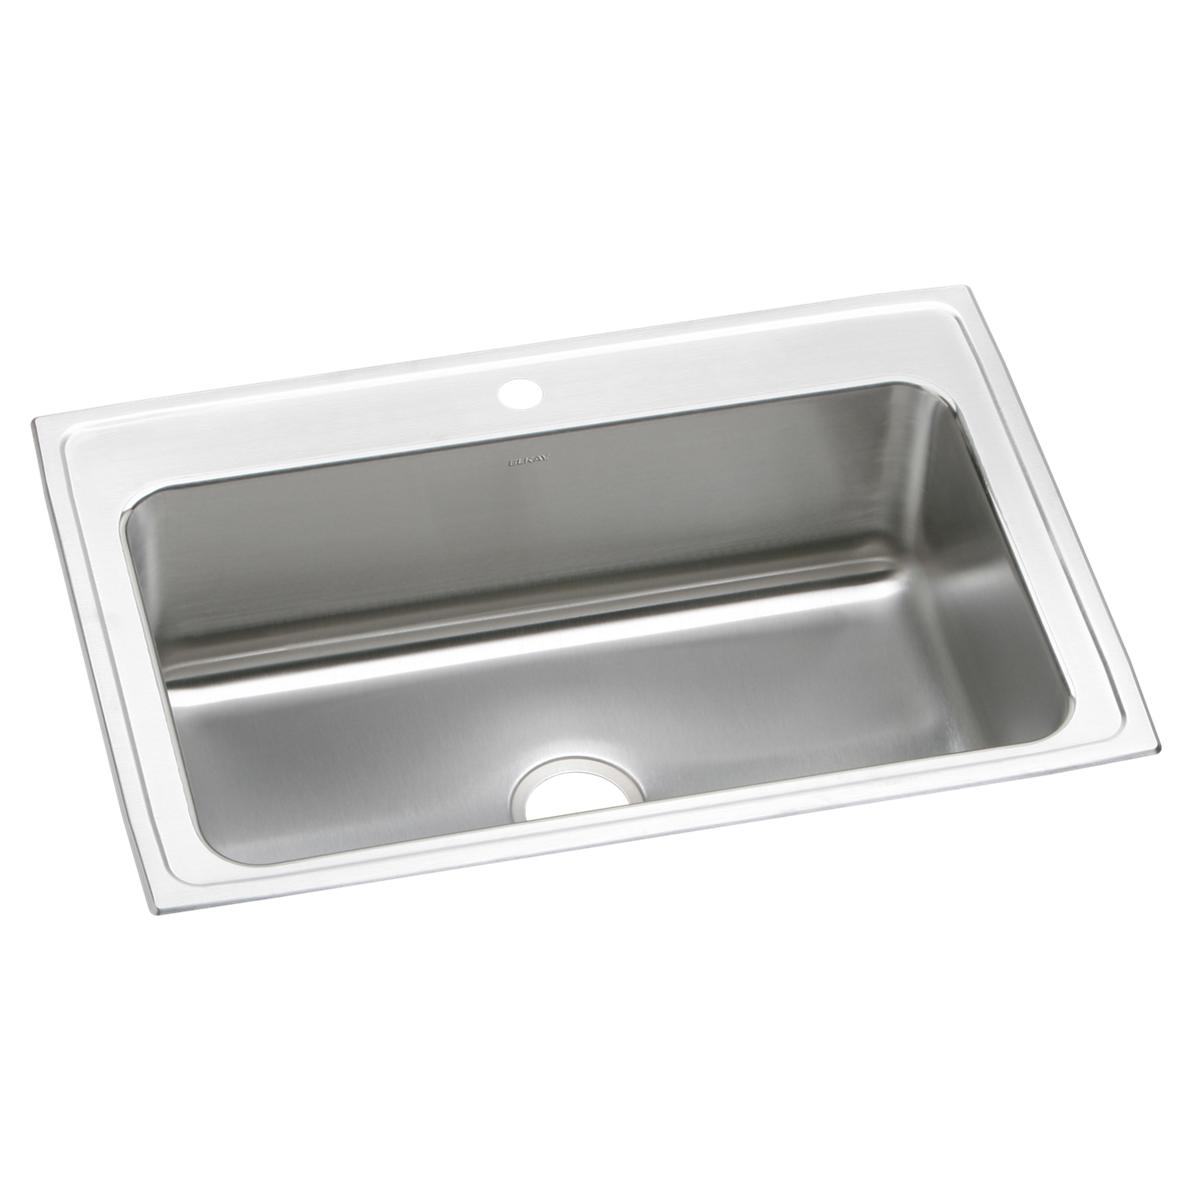 Elkay Lustertone Classic 33" x 22" x 10-1/8" Single Bowl Drop-in Sink with Quick-clip